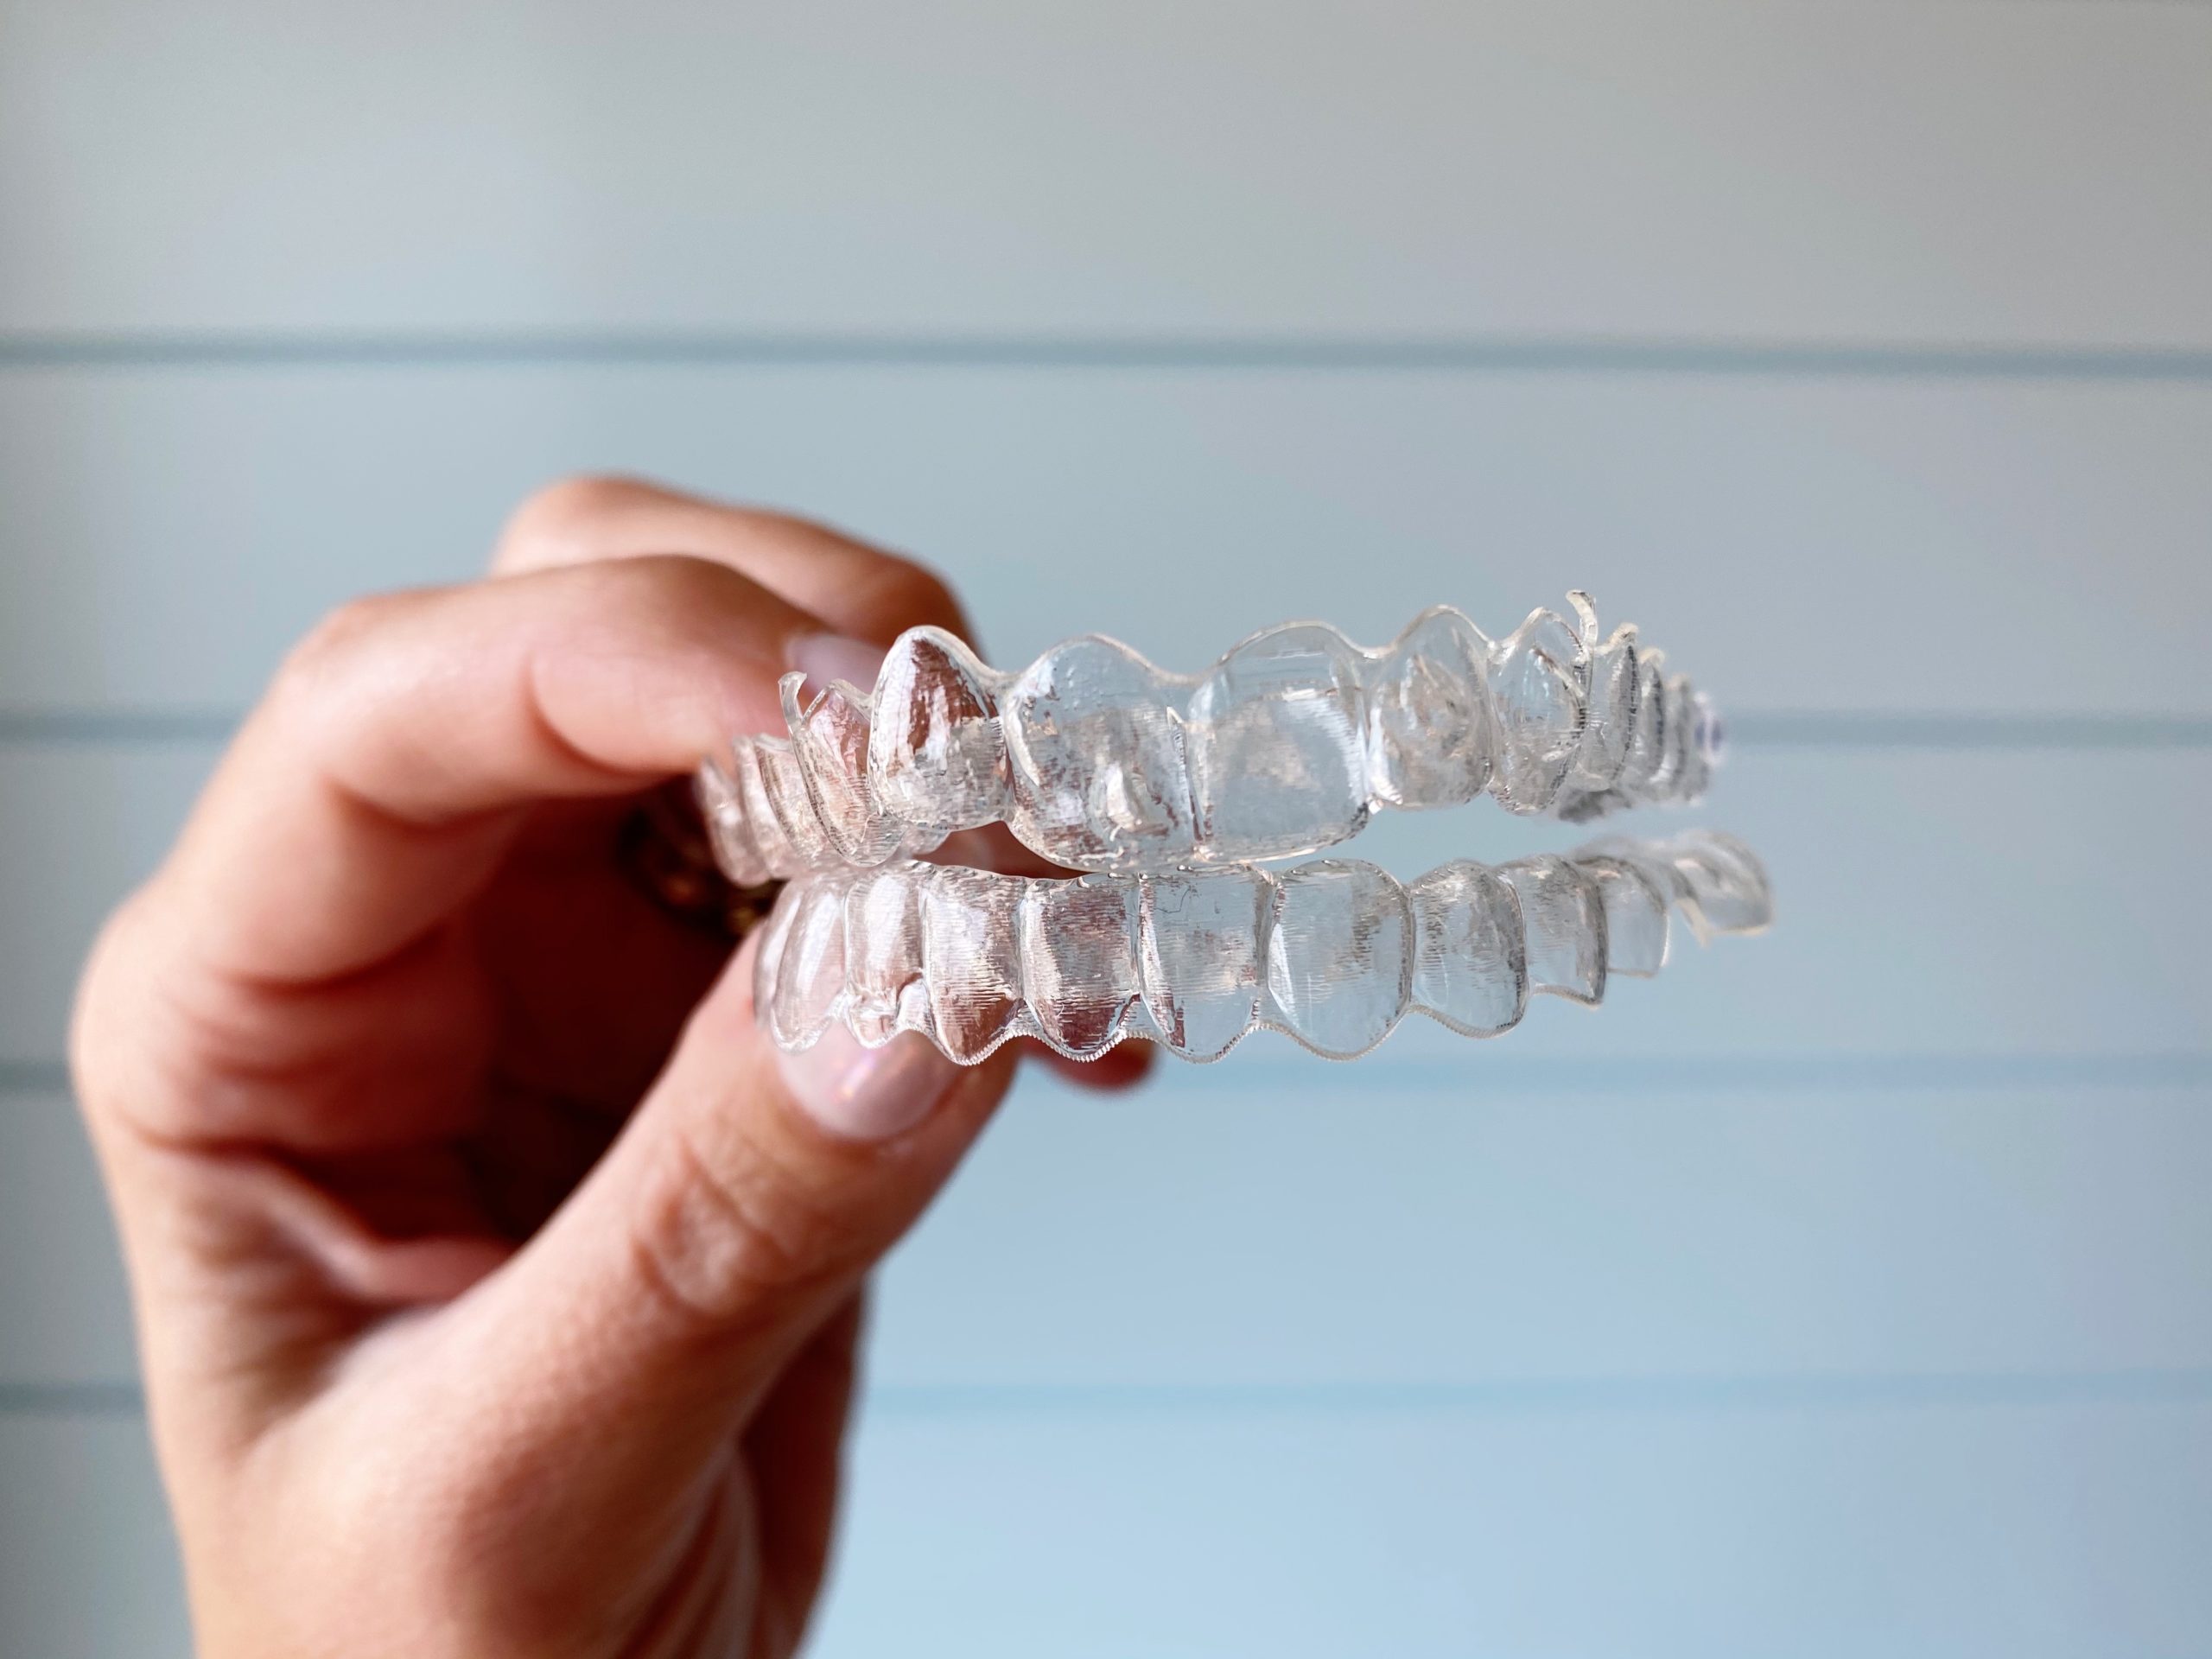 Results With Invisalign